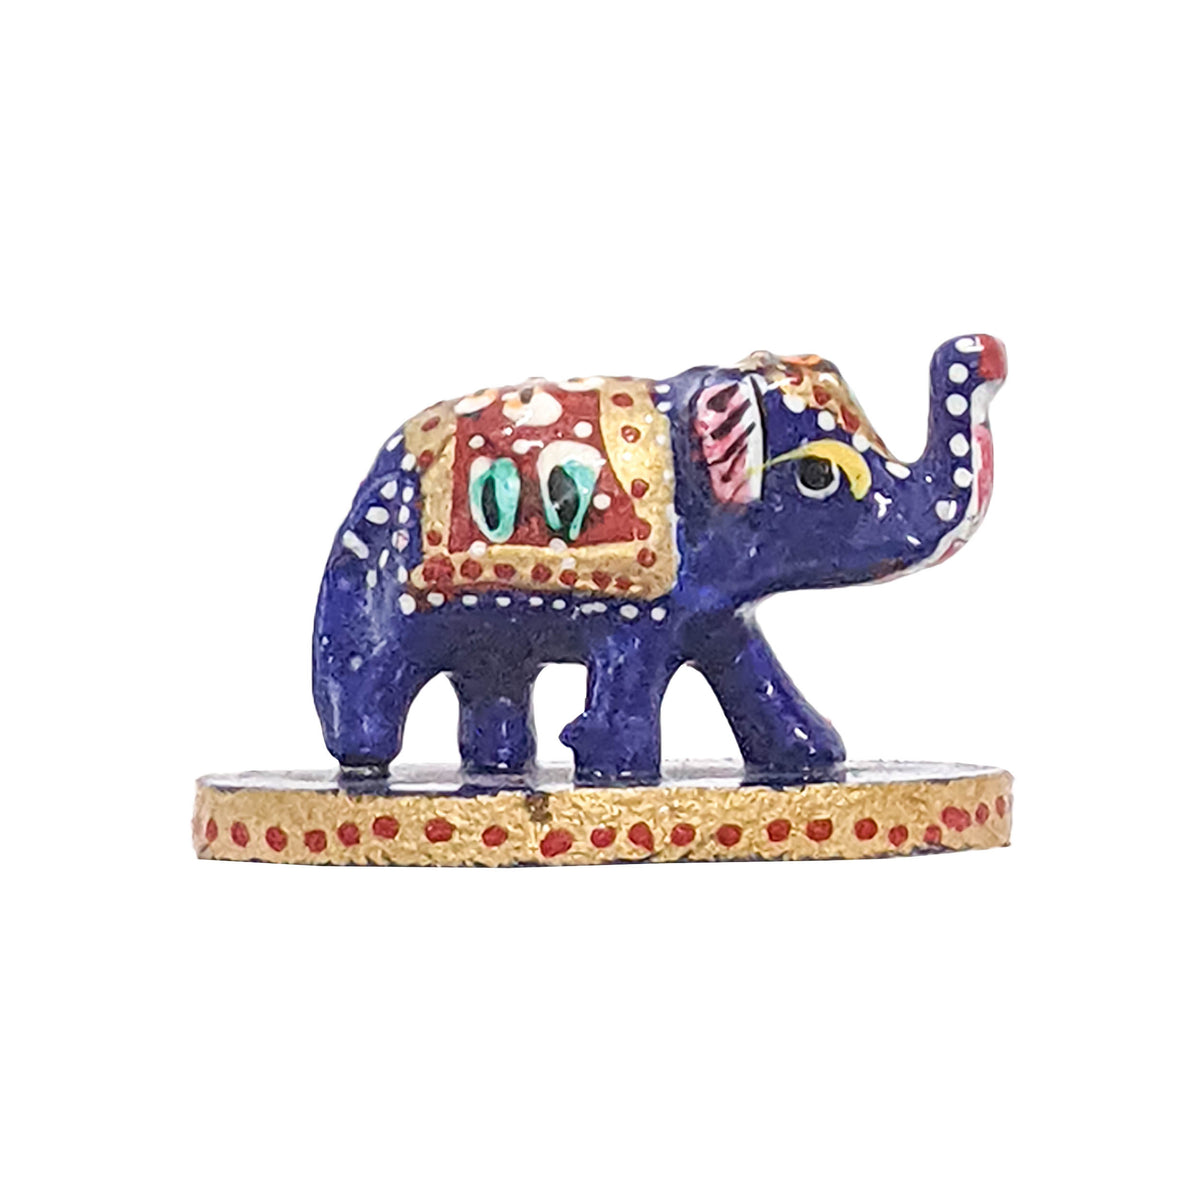 Bring the Magic of Handmade and Hand Painted Elephants into Your Home